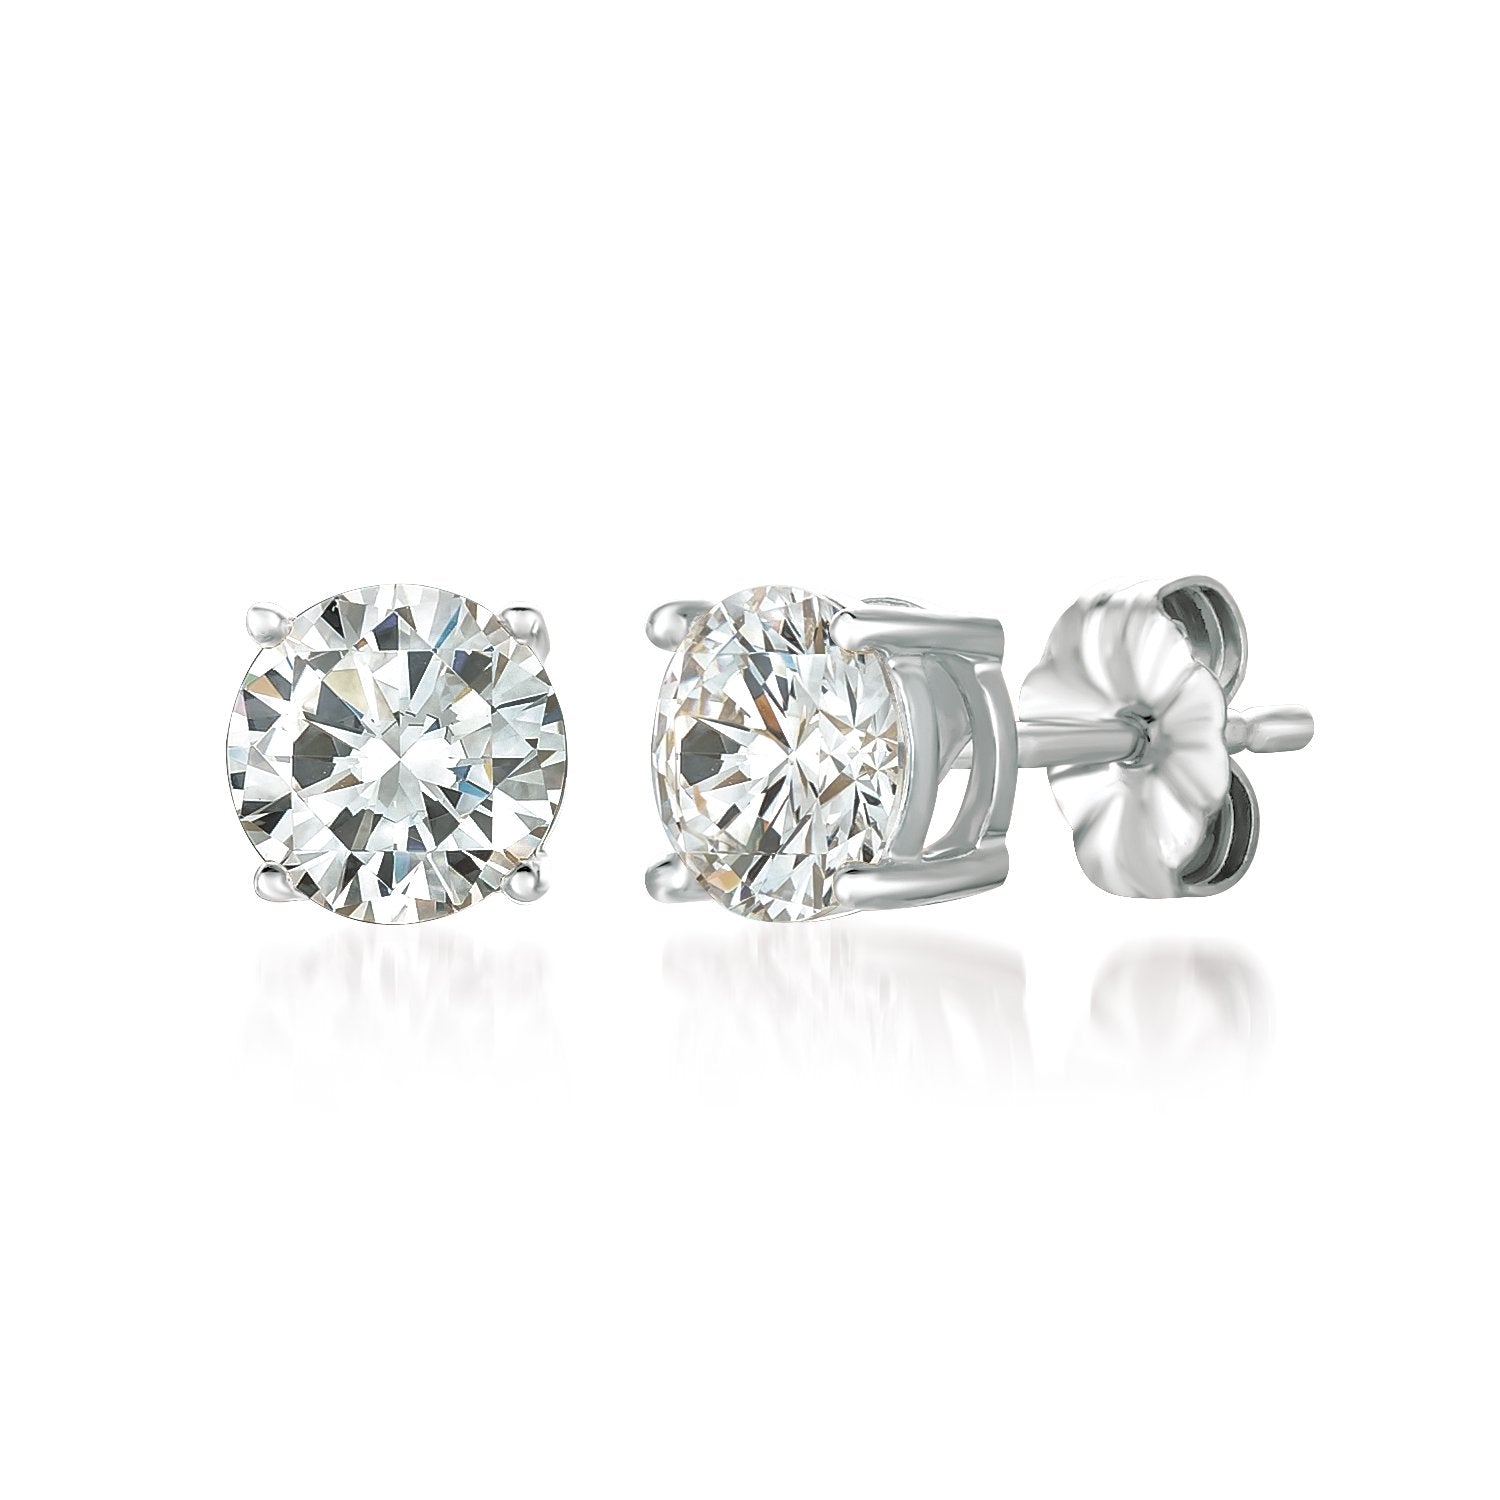 Solitaire Brilliant Stud Earrings Finished in Pure Platinum- 2.0 Cttw ...